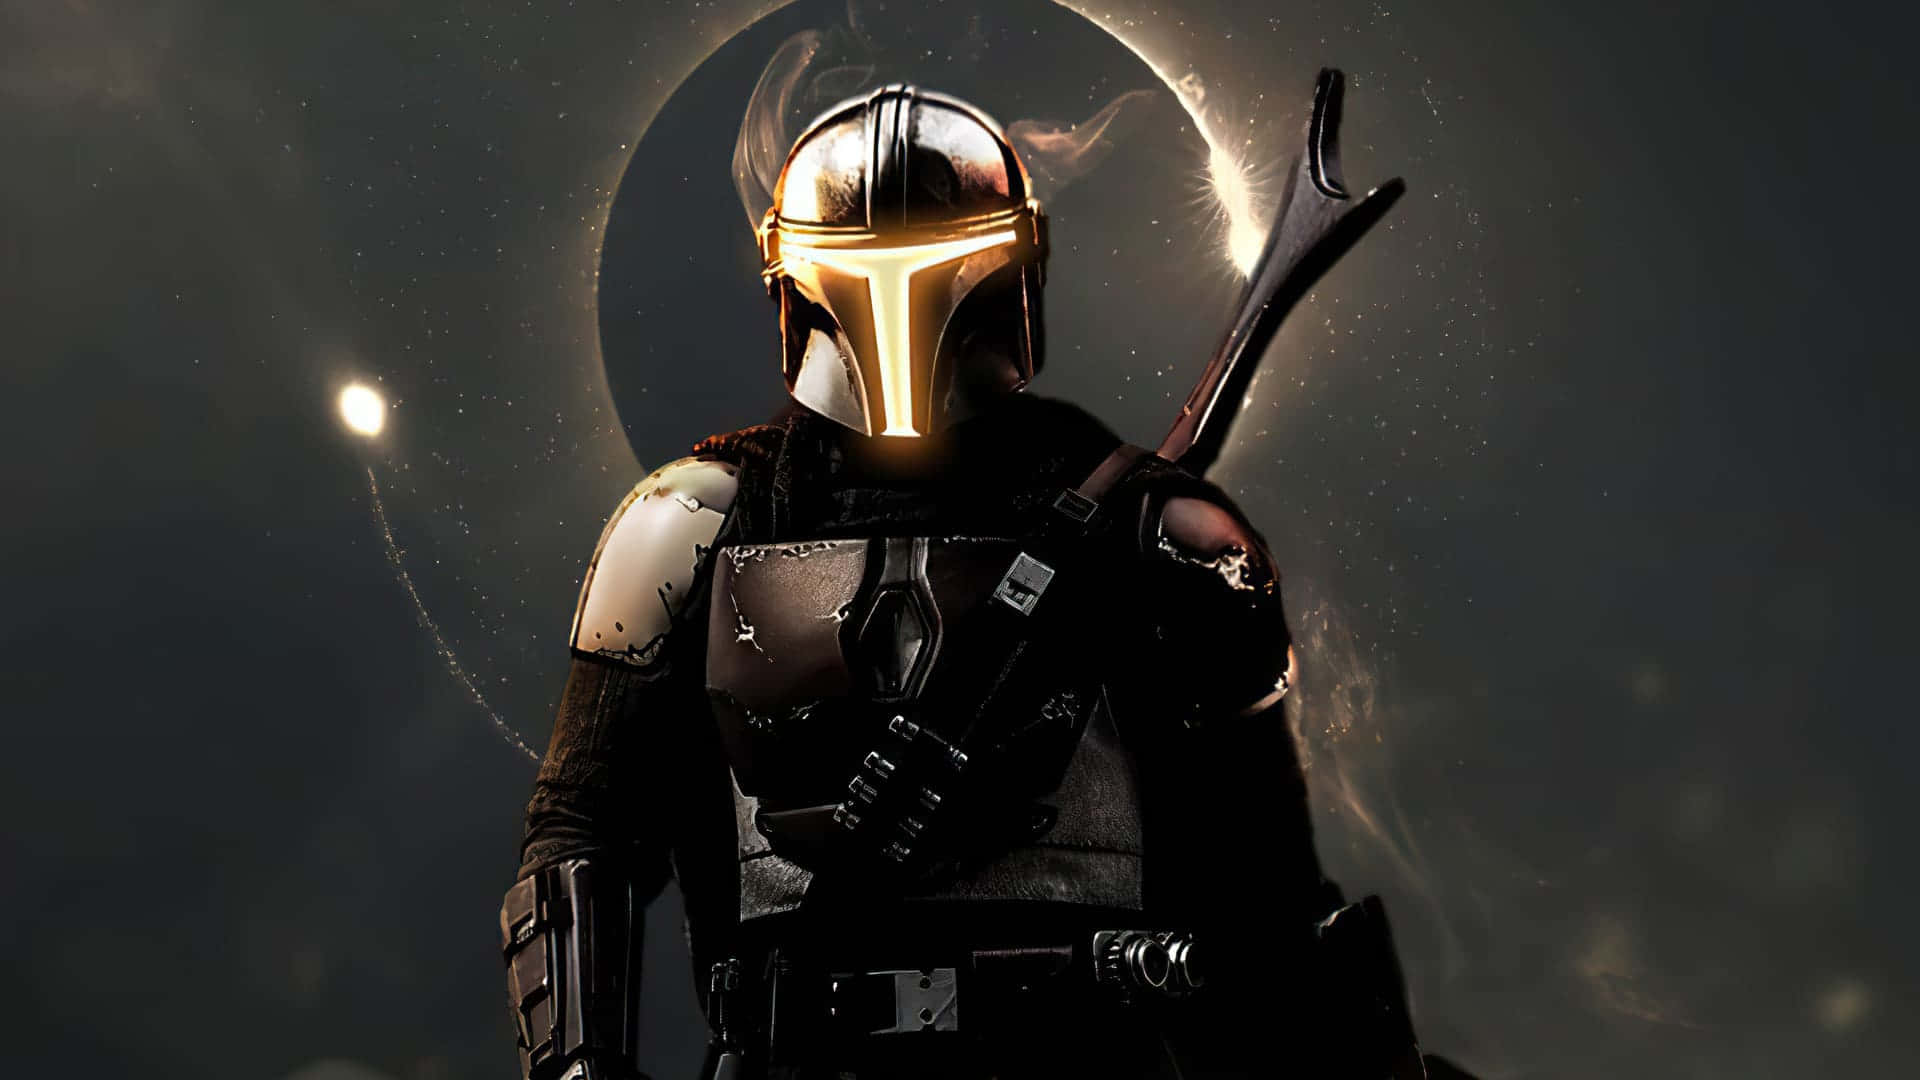 The Lone Mandalorian - A Man and His Armor